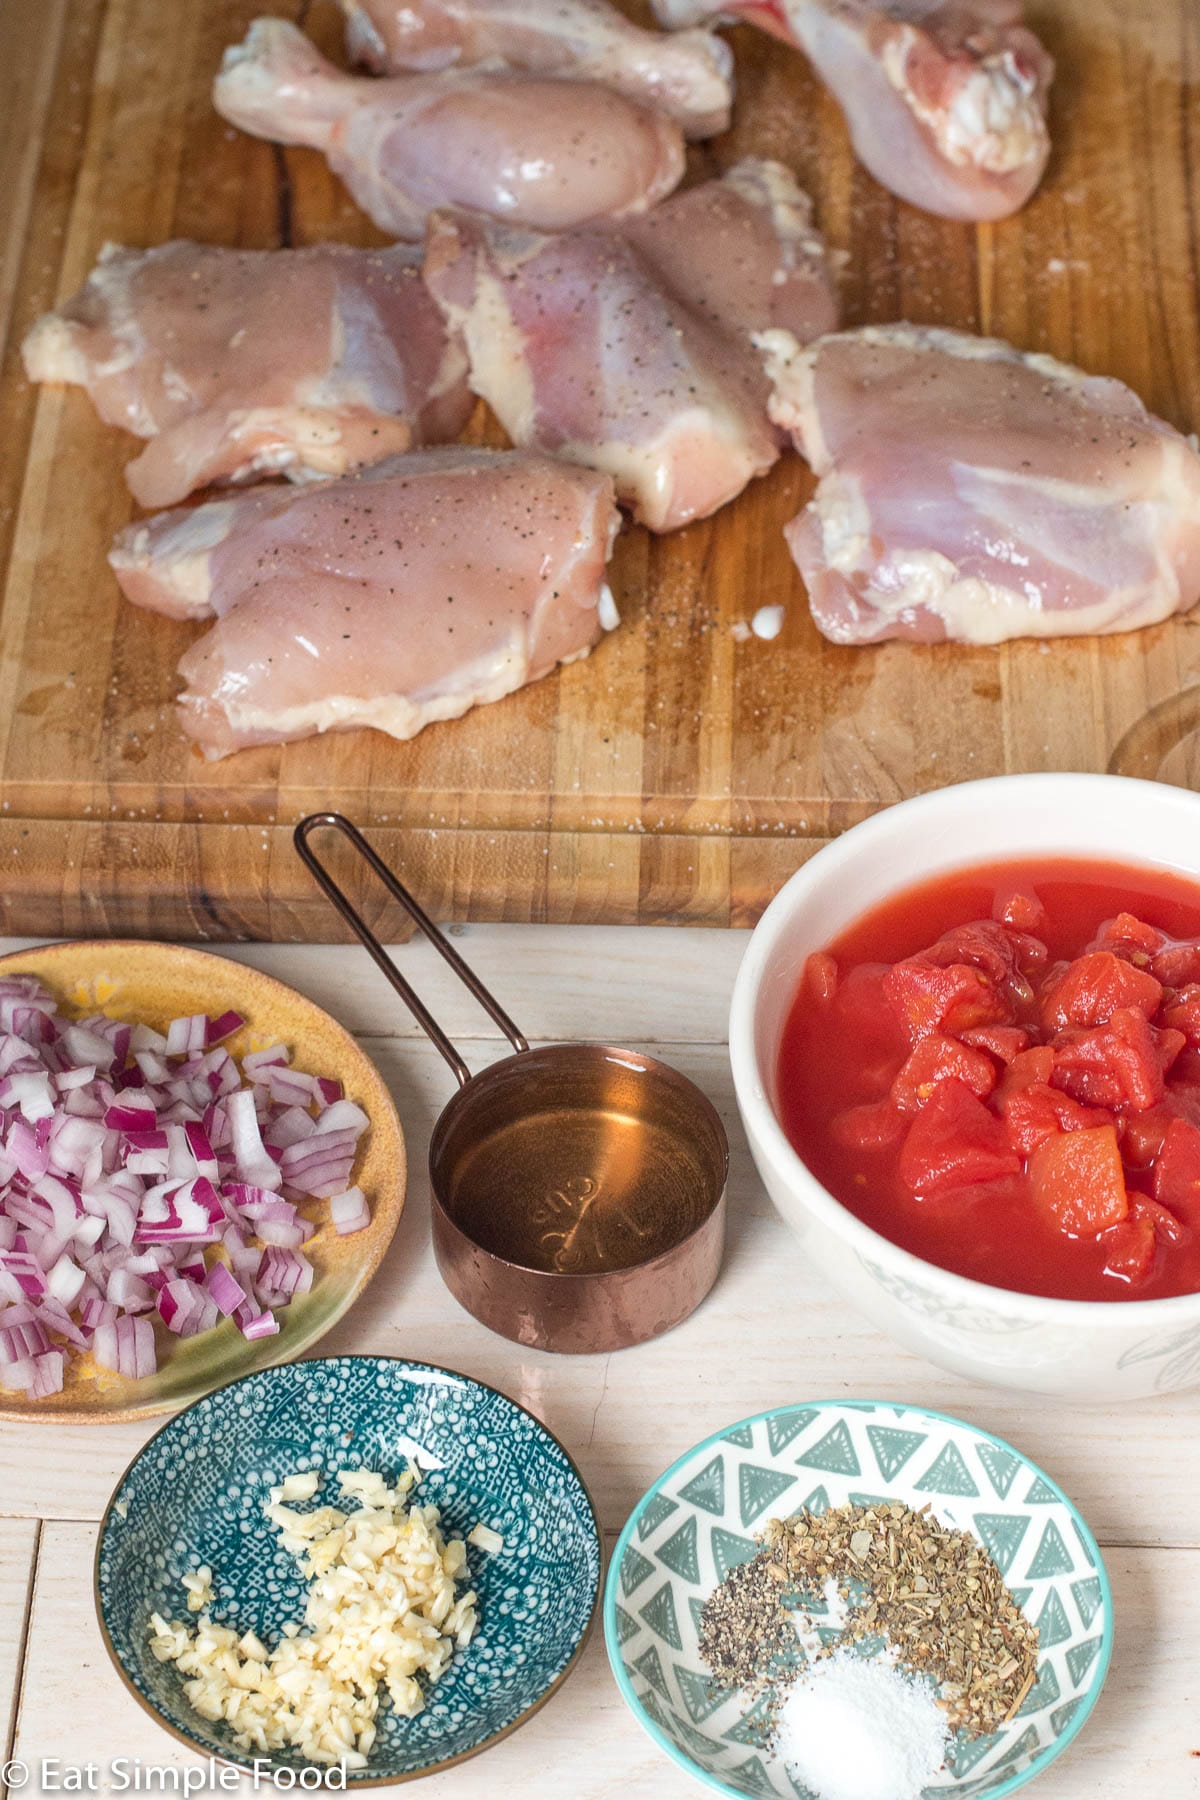 Raw ingredients: diced red onions, minced garlic, bowl of diced canned tomatoes, ⅓ cup white wine, raw chicken thighs and drums on a wood cutting board. Side view.